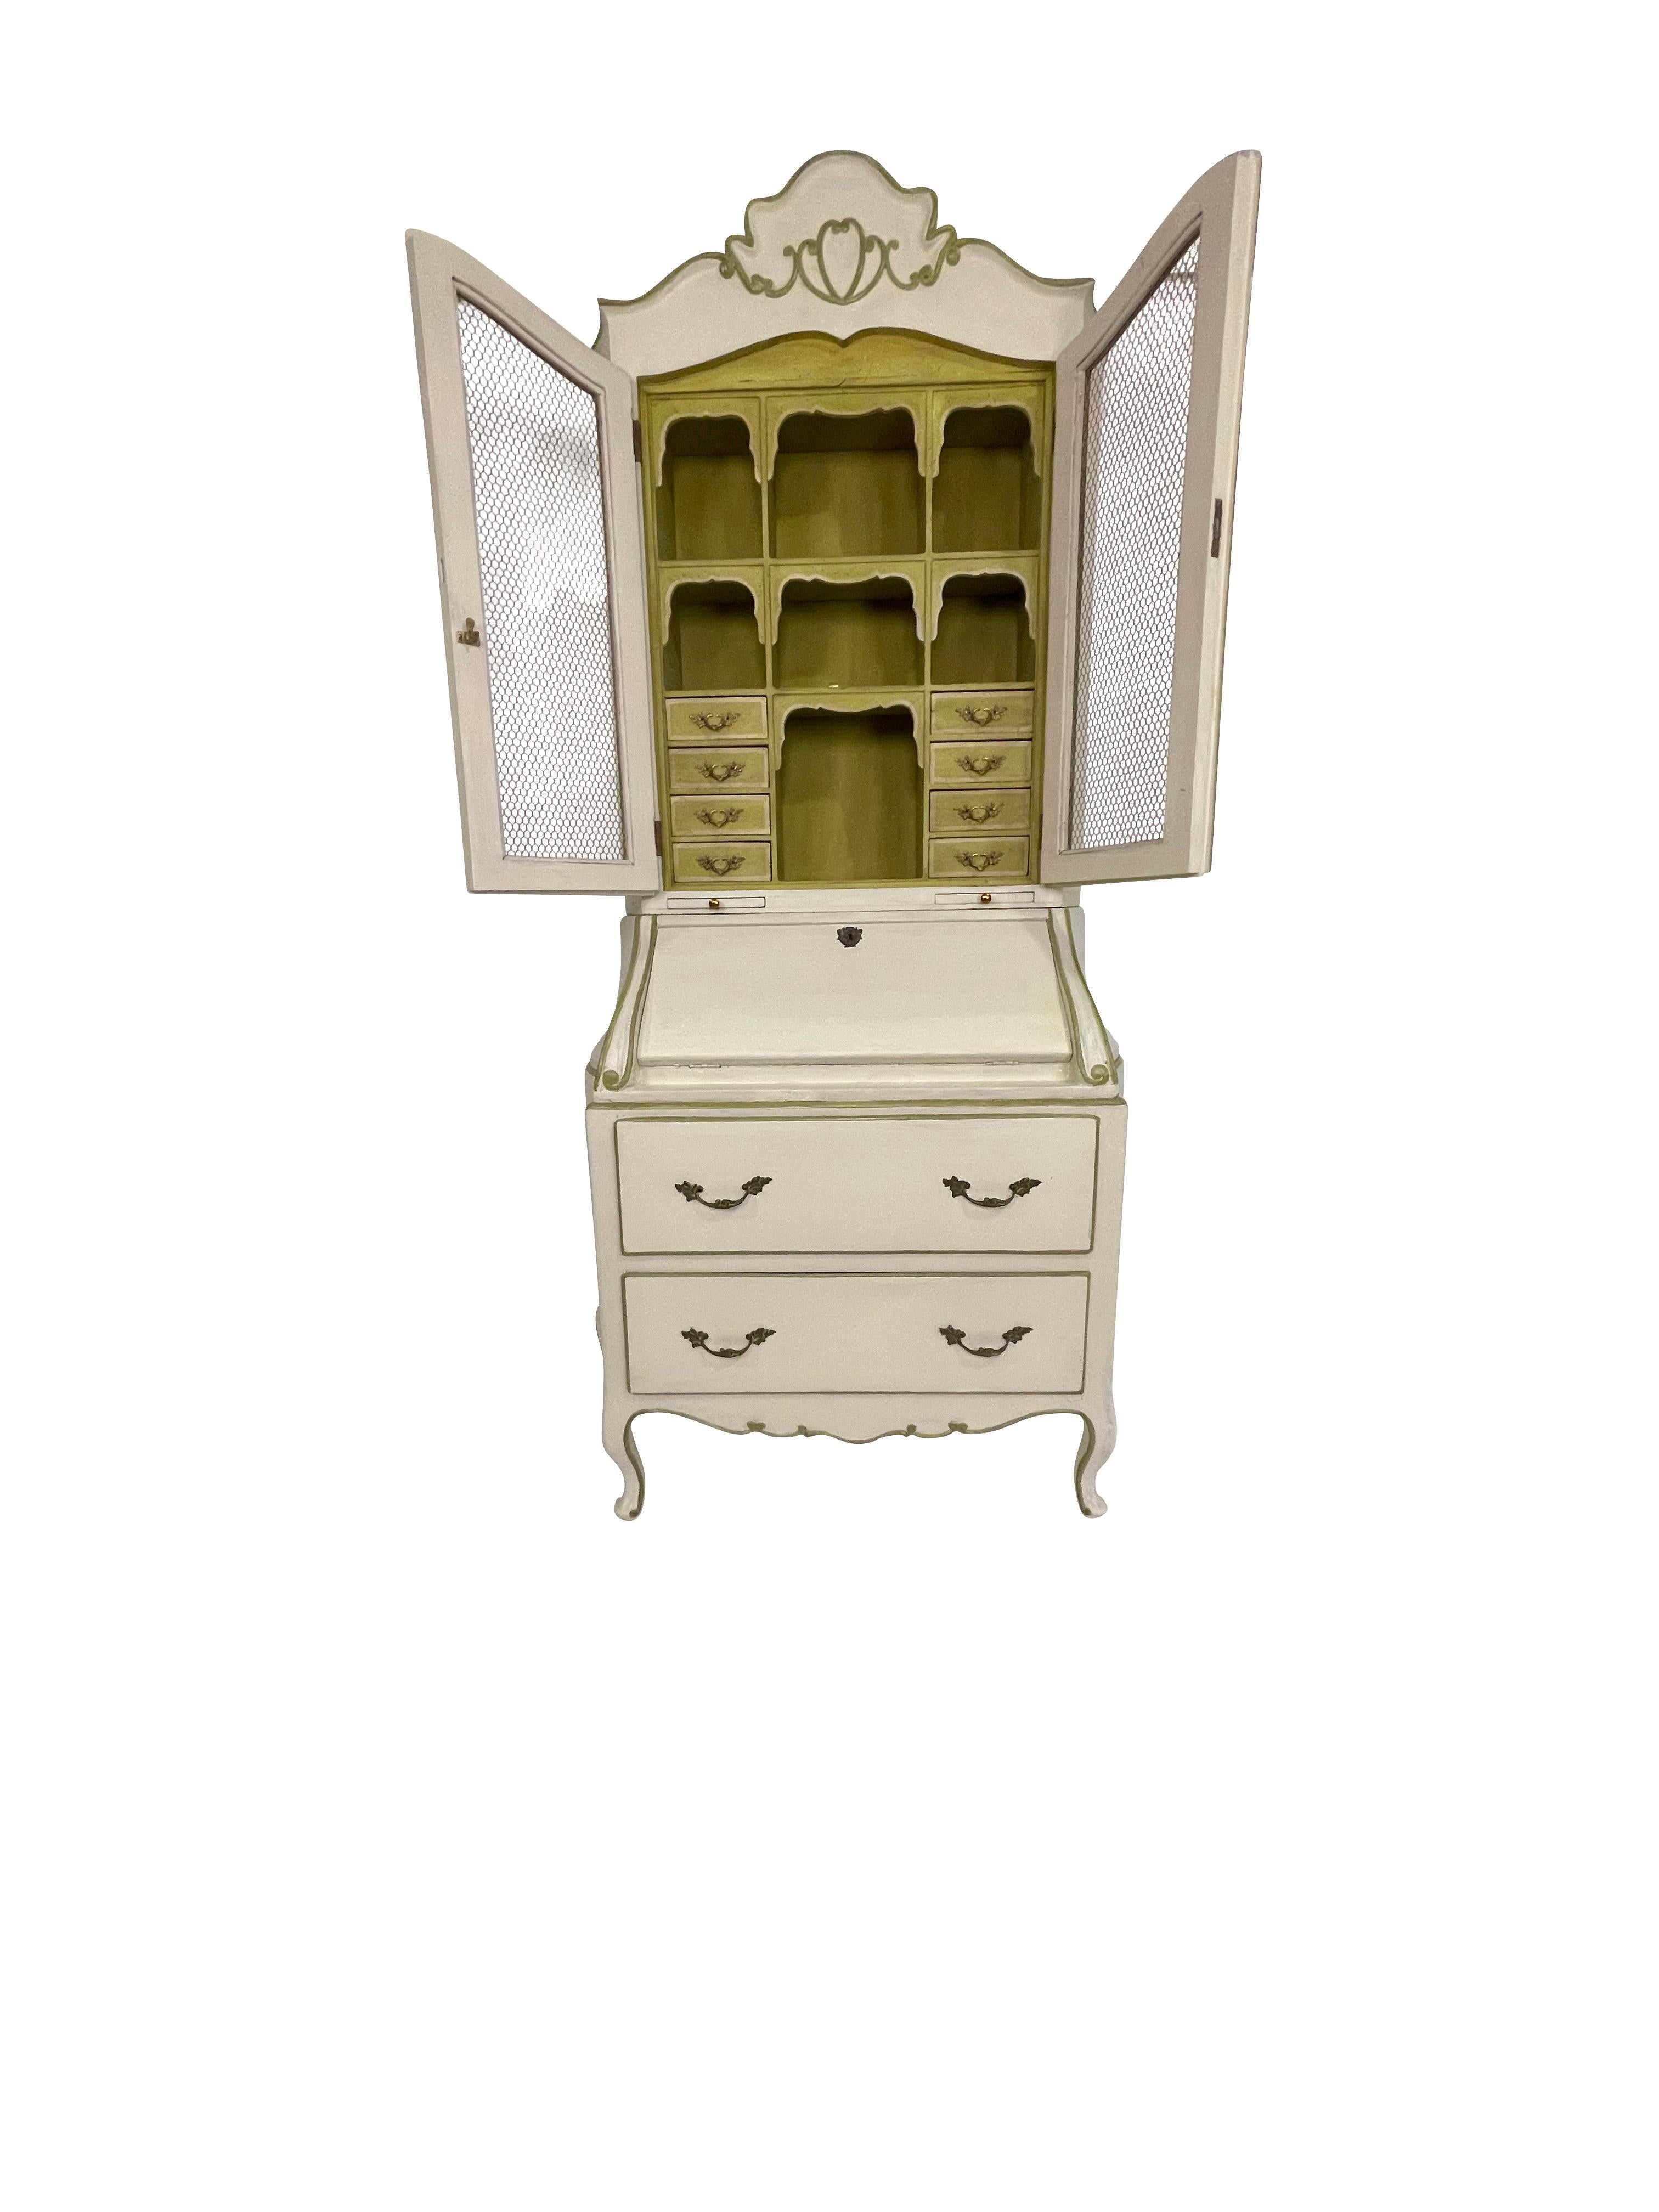 Painted French Provincial Ivory and Green circa 1920s Secretary/ Desk For Sale 1